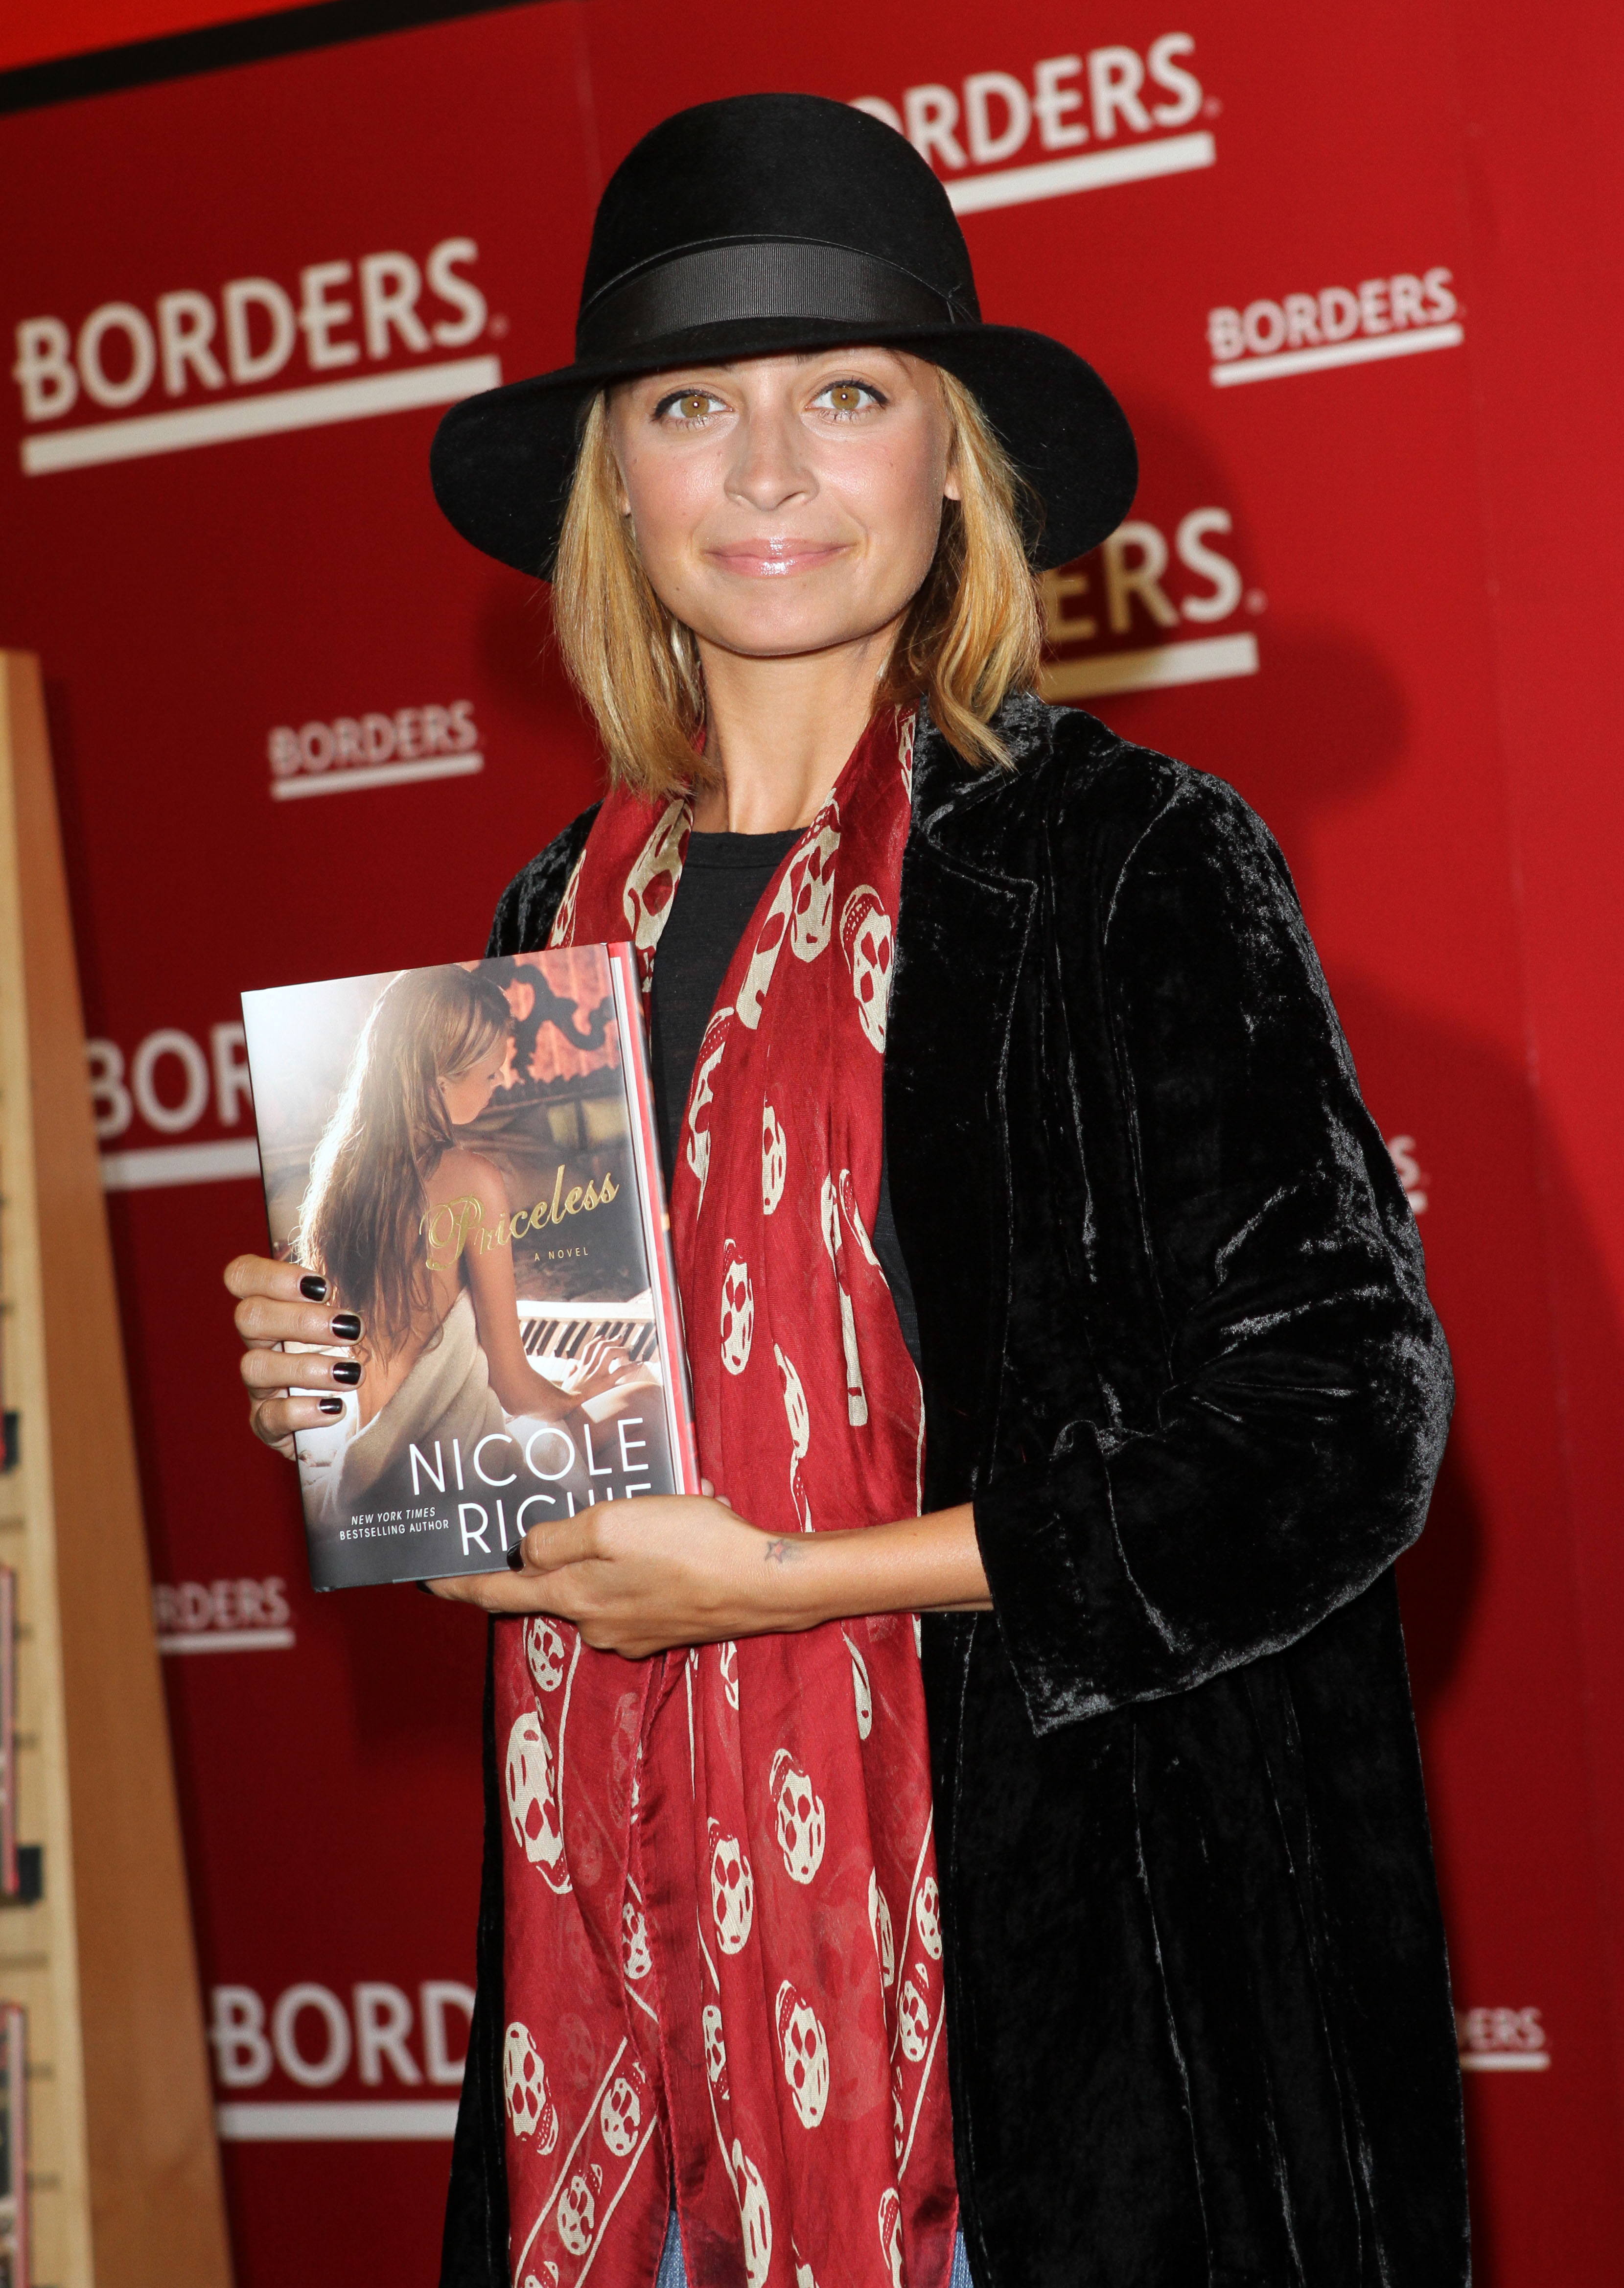 Nicole Richie holds a book signing at Borders in NYC